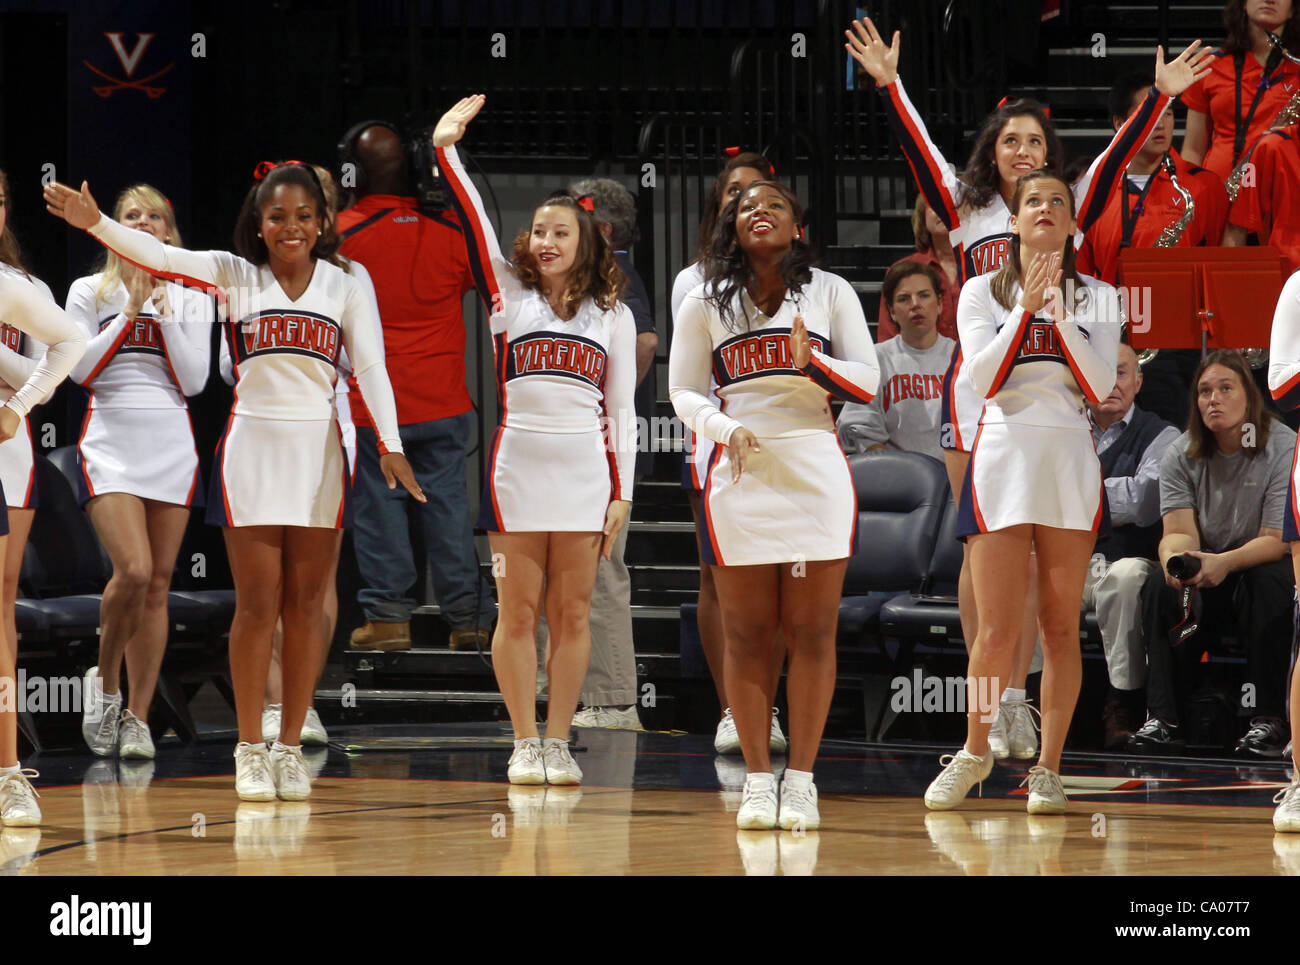 Nov. 20, 2011 - Charlottesville, Virginia, United States - The Virginia Cavaliers cheerleaders perform during the game on November 20, 2011 against the Tennessee Lady Volunteers at the John Paul Jones Arena in Charlottesville, Virginia. Virginia defeated Tennessee in overtime 69-64. (Credit Image: © Stock Photo